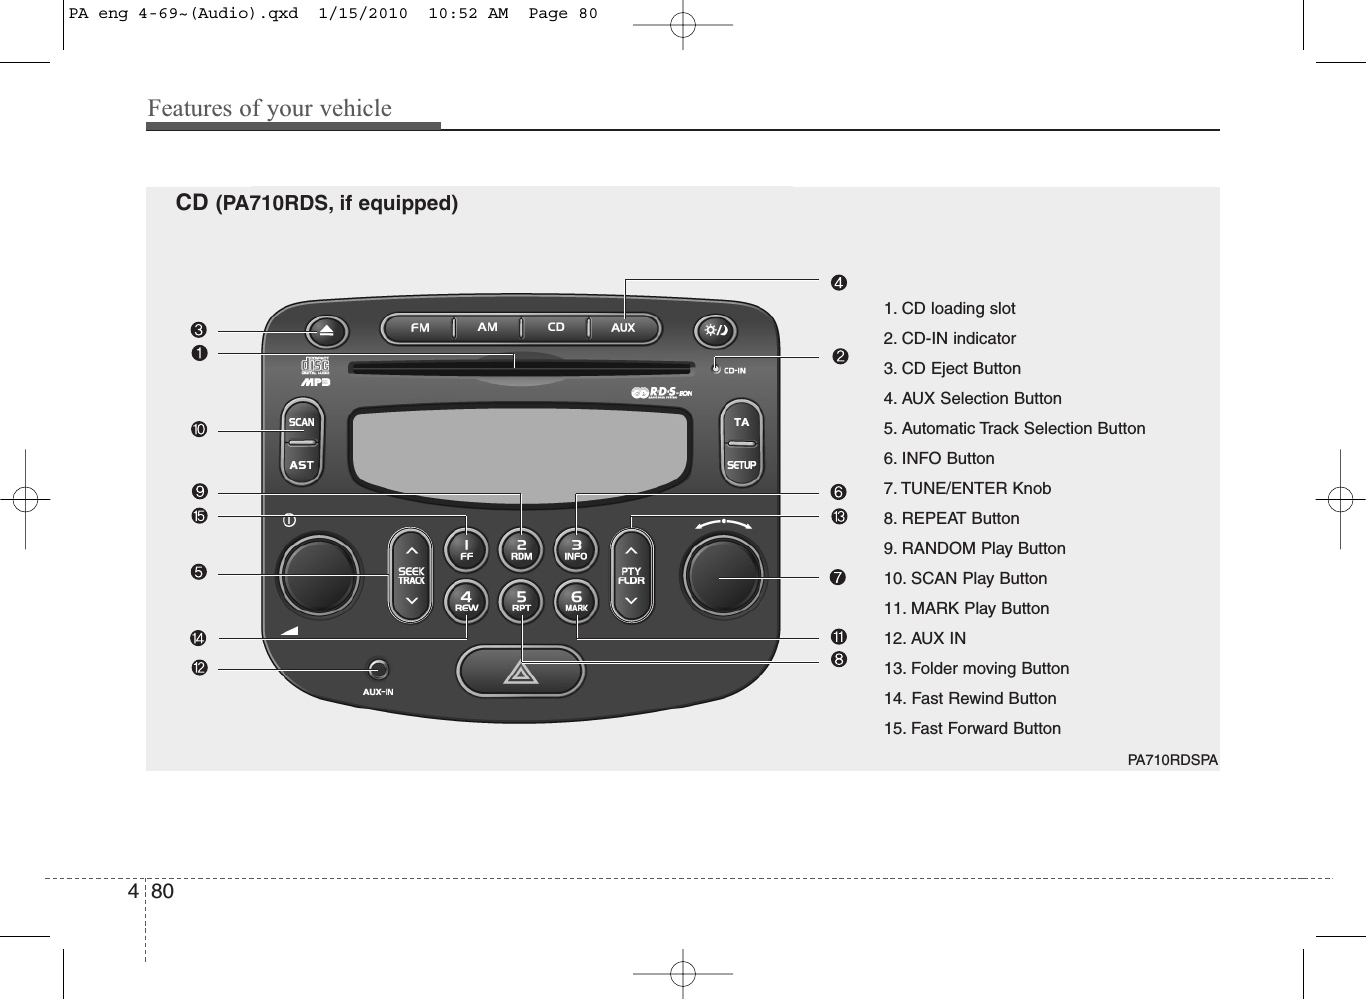 Features of your vehicle8041. CD loading slot2. CD-IN indicator3. CD Eject Button4. AUX Selection Button5. Automatic Track Selection Button6. INFO Button7. TUNE/ENTER Knob8. REPEAT Button9. RANDOM Play Button10. SCAN Play Button11. MARK Play Button12. AUX IN13. Folder moving Button14. Fast Rewind Button15. Fast Forward ButtonPA710RDSPACD (PA710RDS, if equipped)PA eng 4-69~(Audio).qxd  1/15/2010  10:52 AM  Page 80